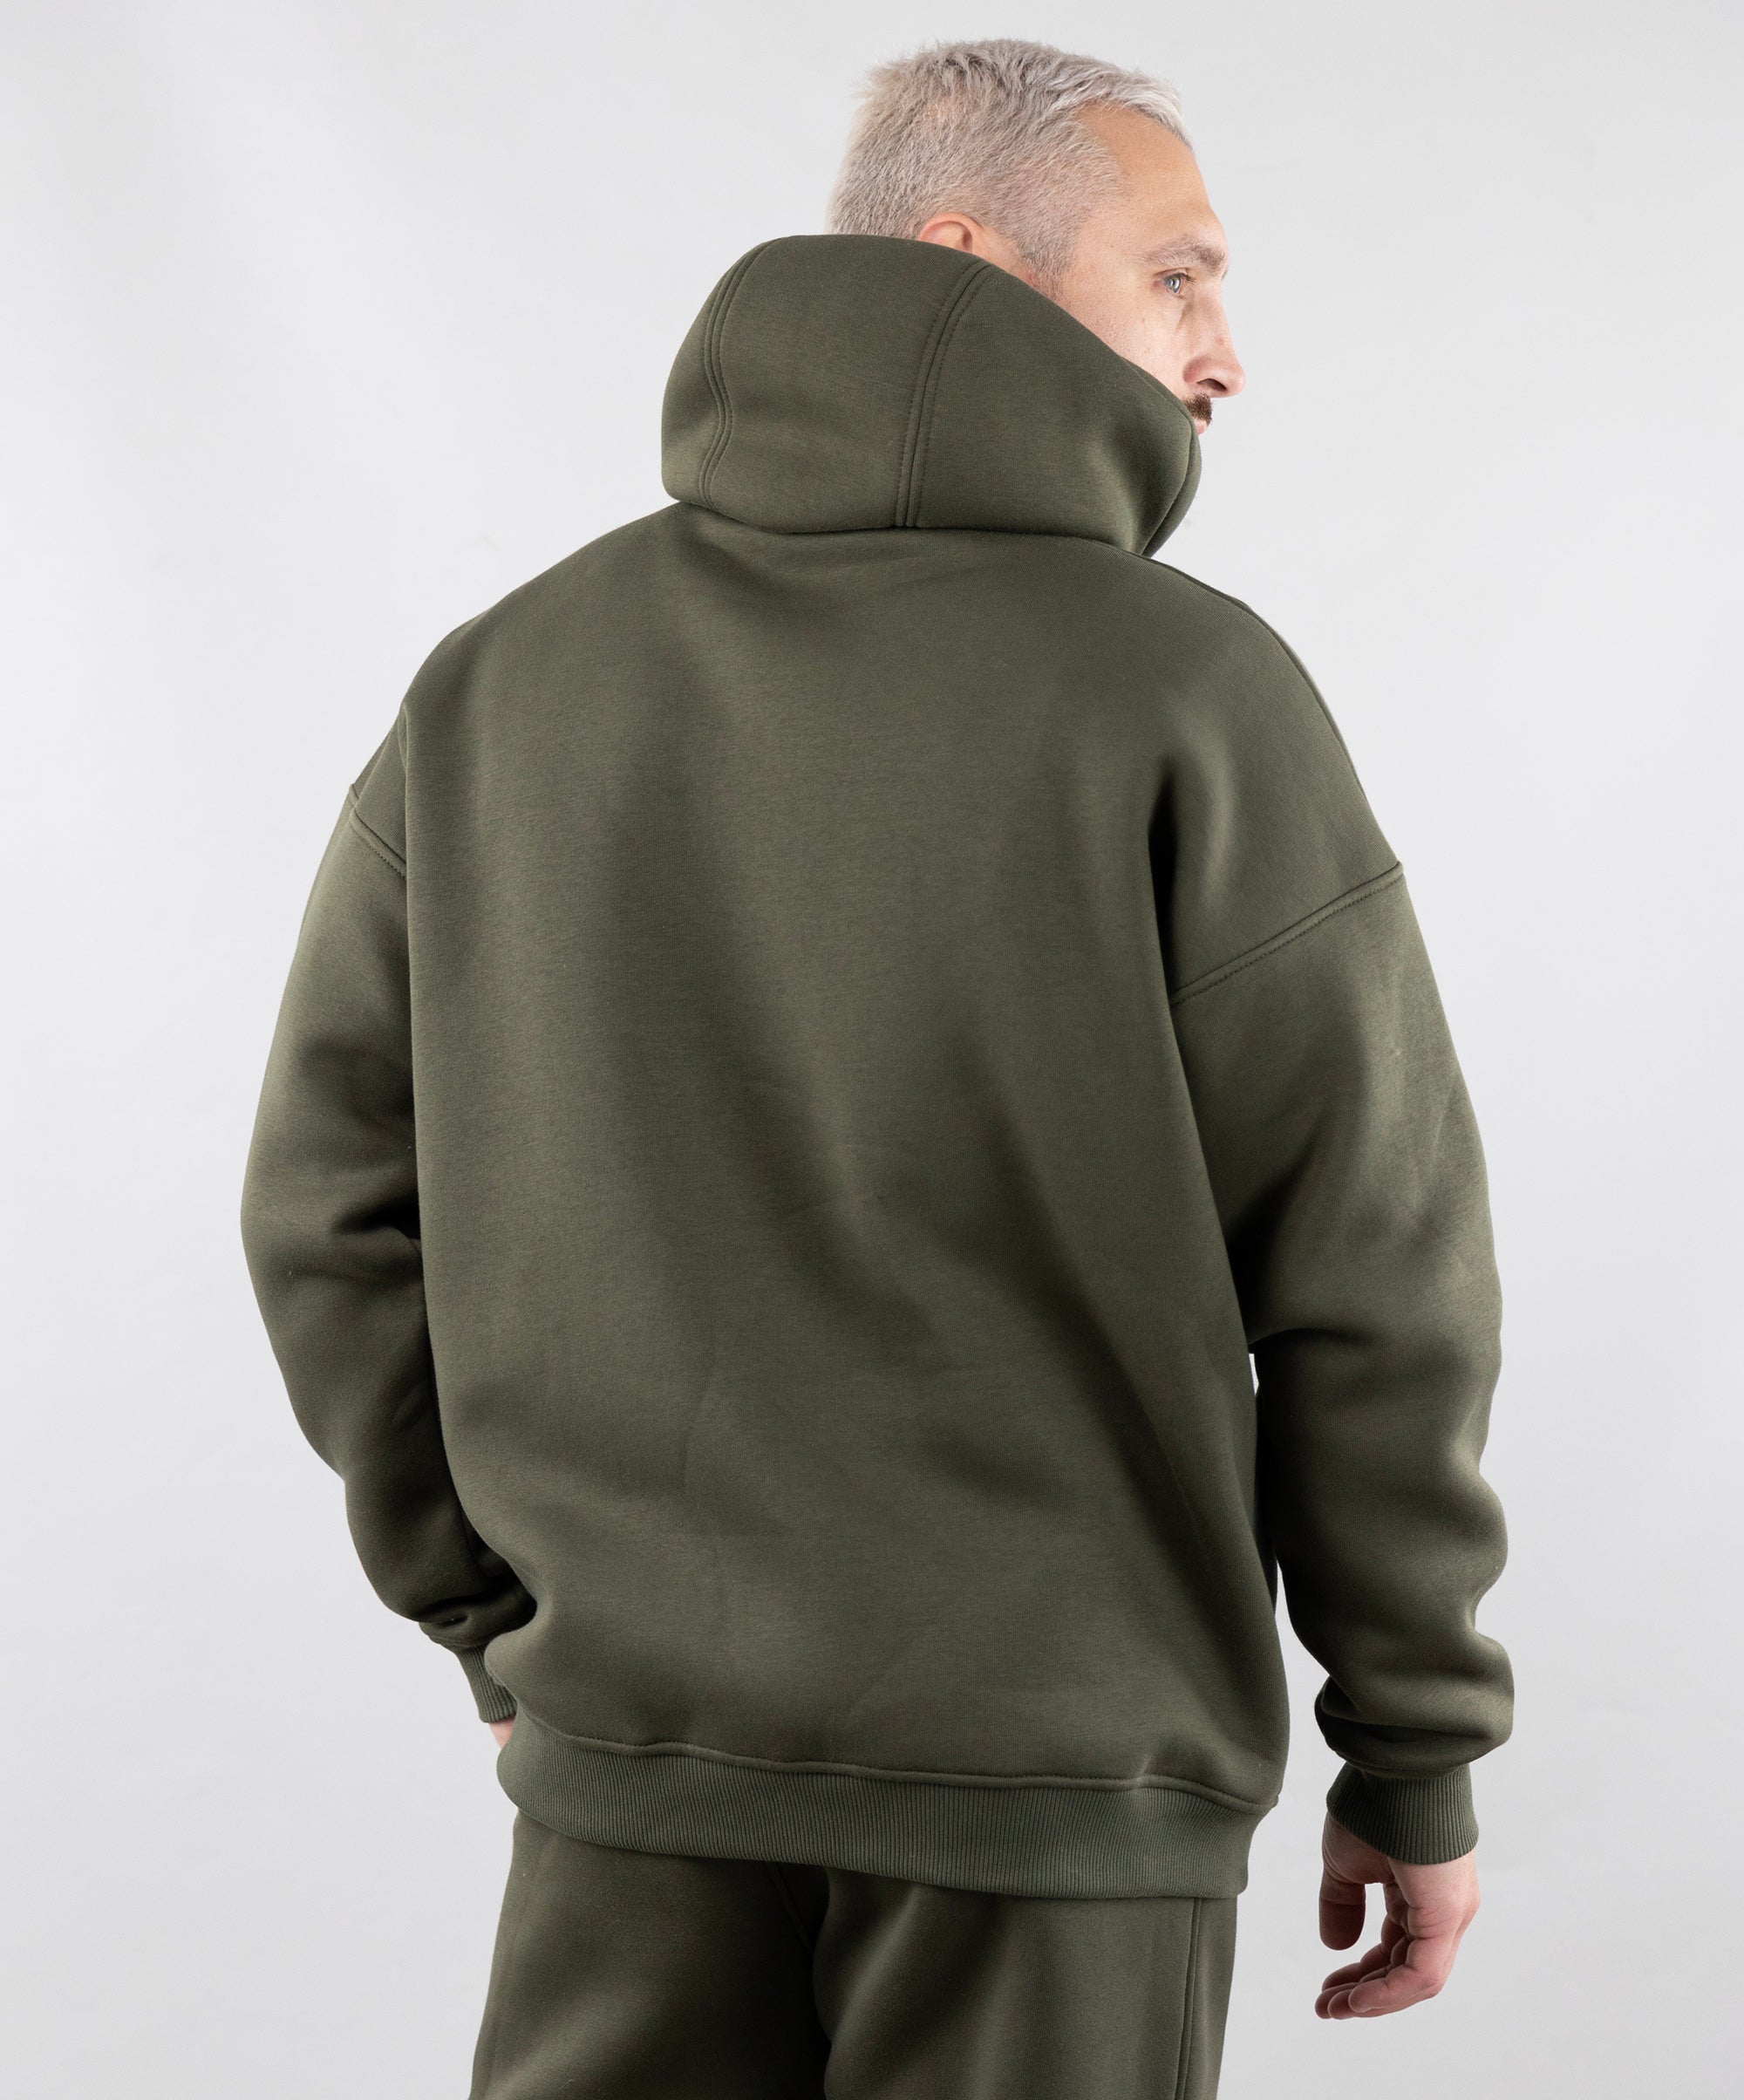 Warm Oversize Hoodie "Introvert". Khaki. Man from the back